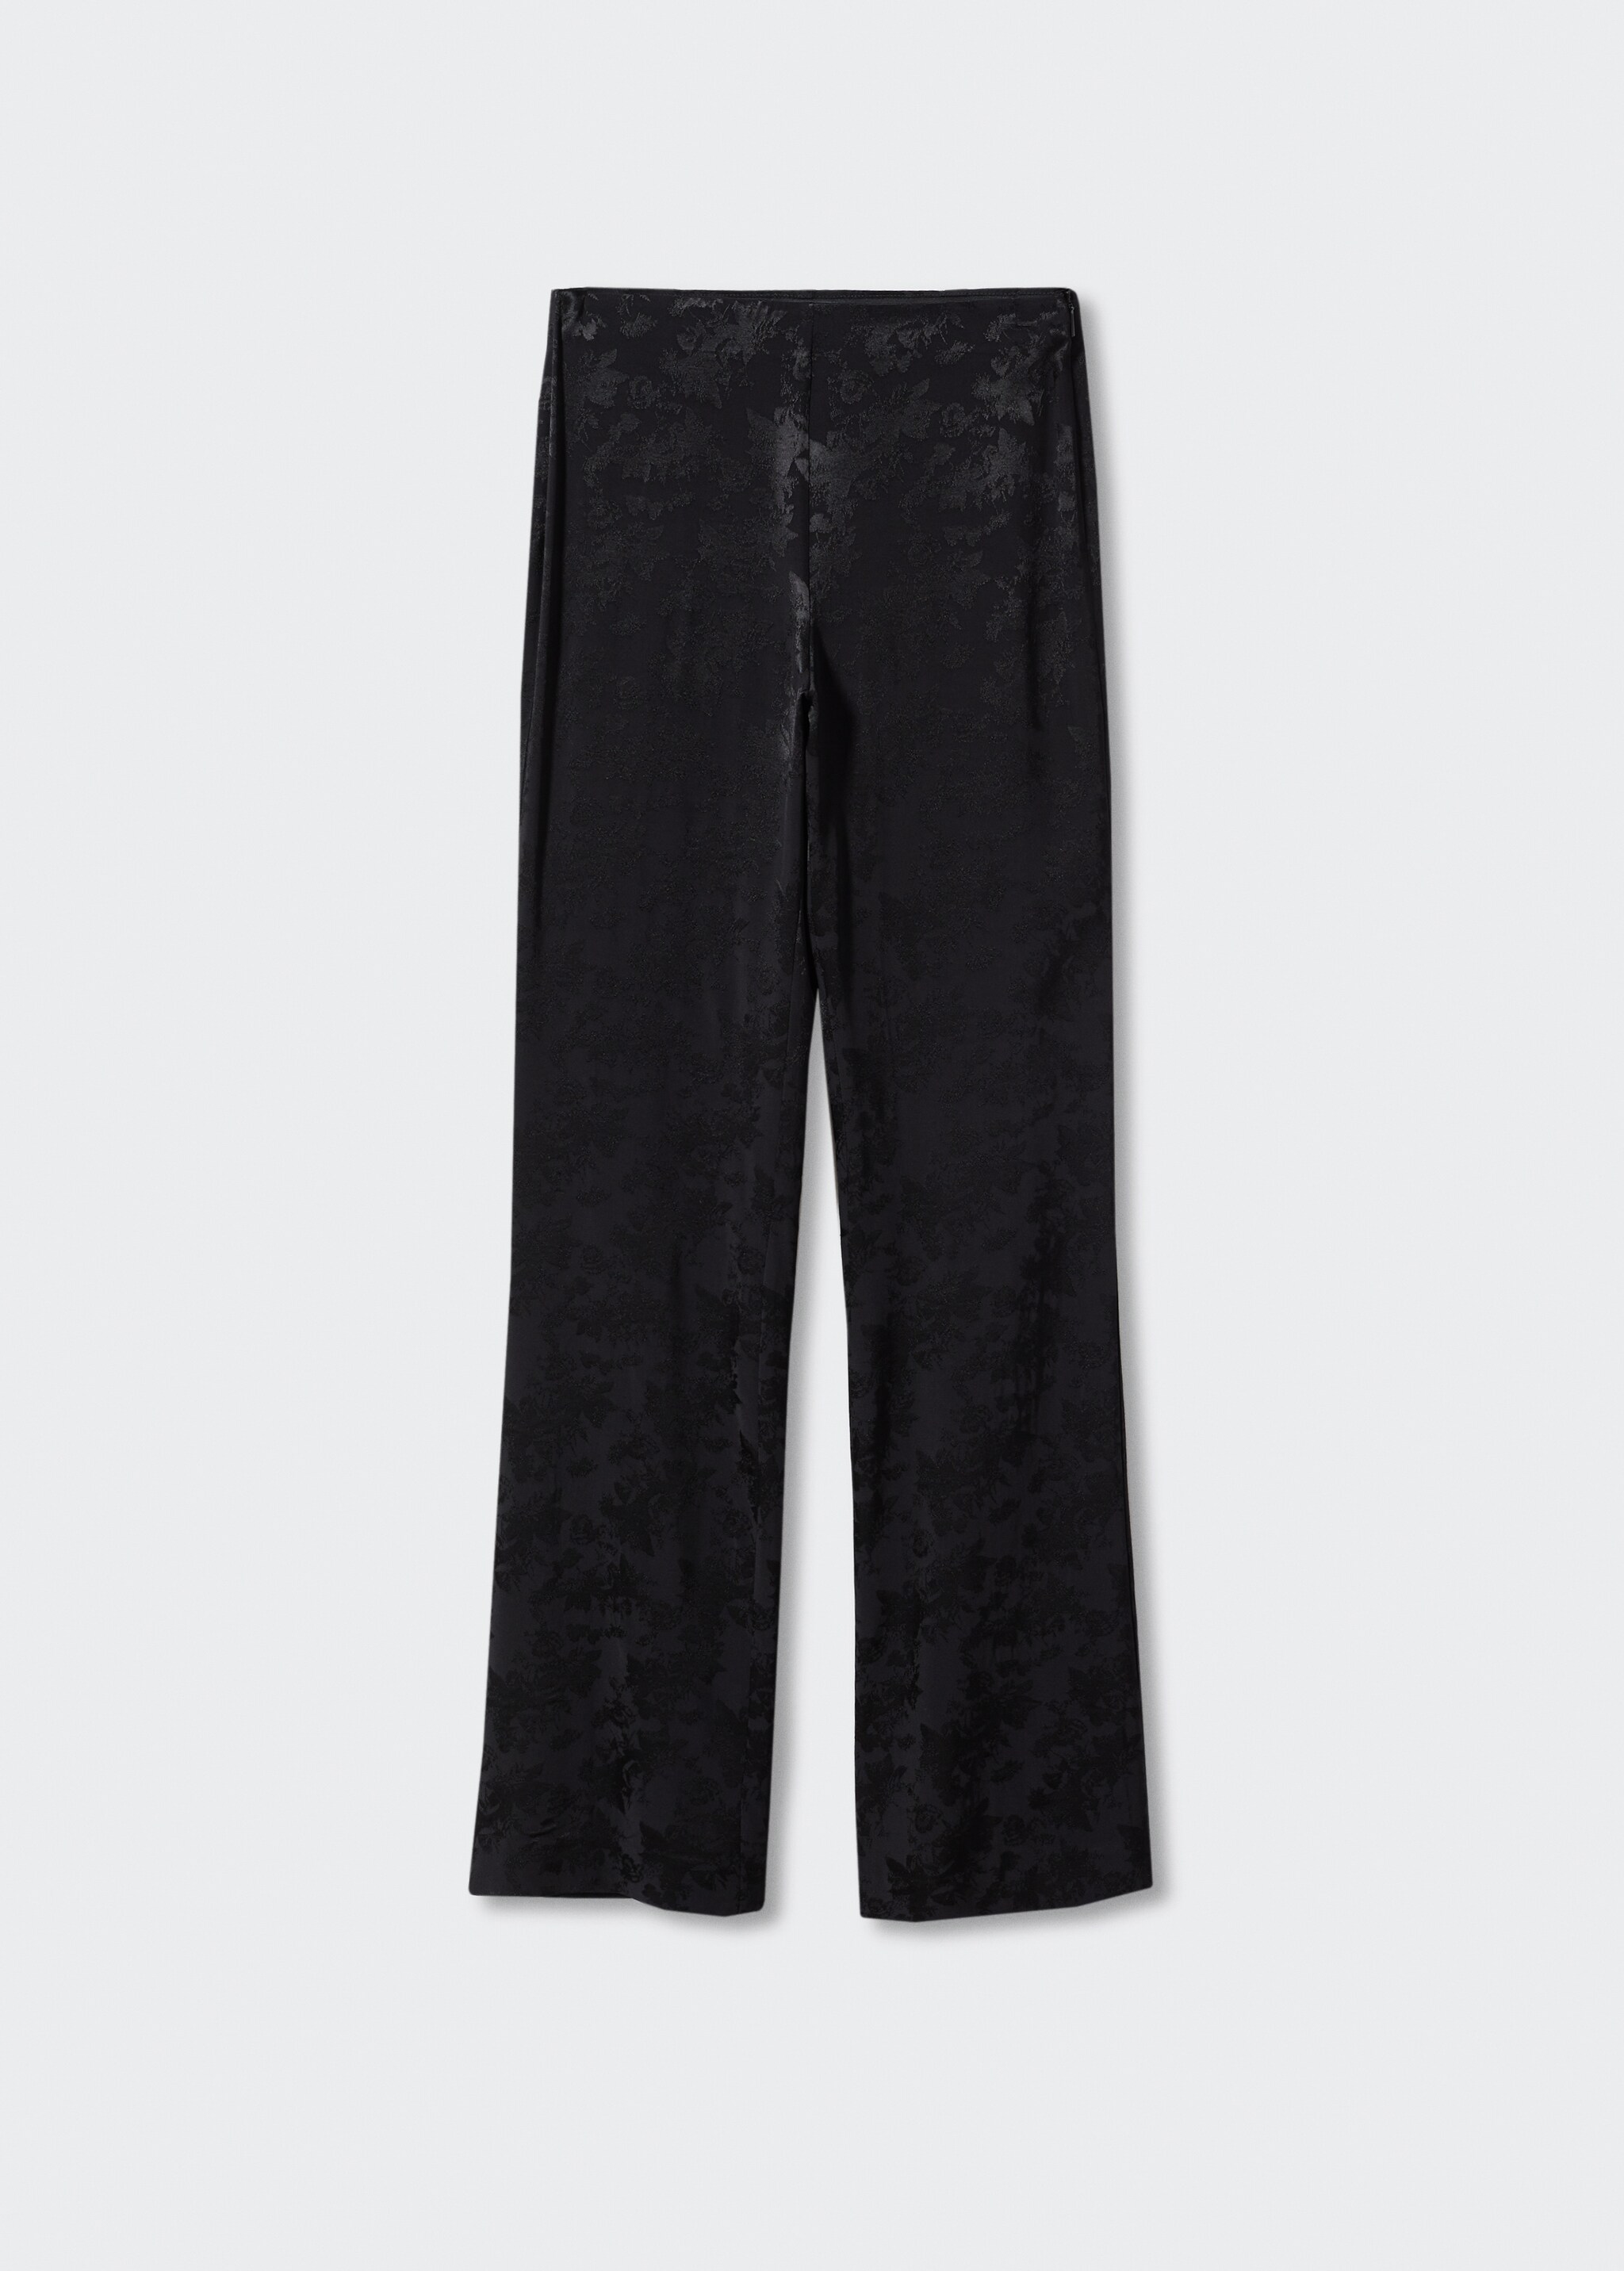 Jacquard fluid trousers - Article without model